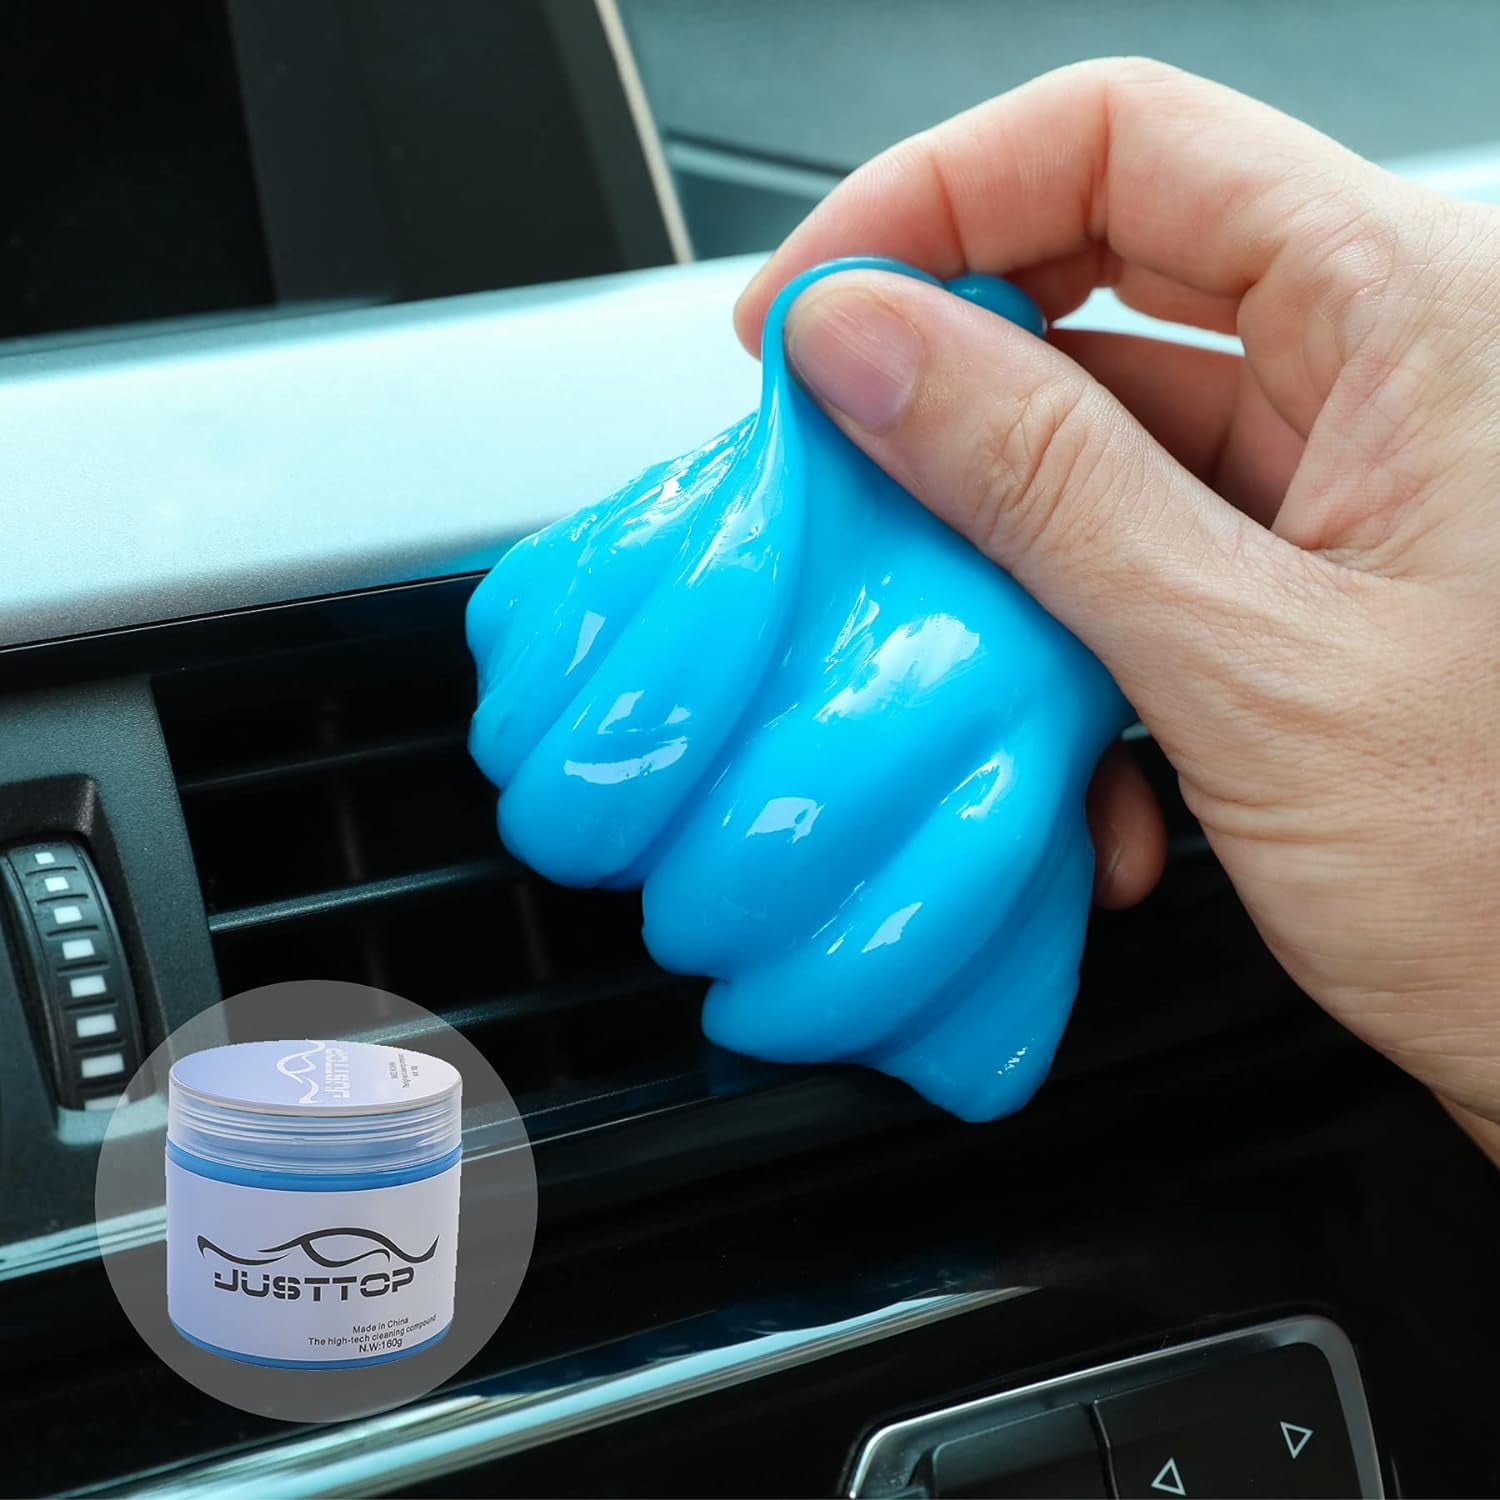 JUSTTOP Universal Cleaning Gel for Car Detailing Putty Gel Detail Tools Car Interior Cleaner Laptop Cleaner(Blue)